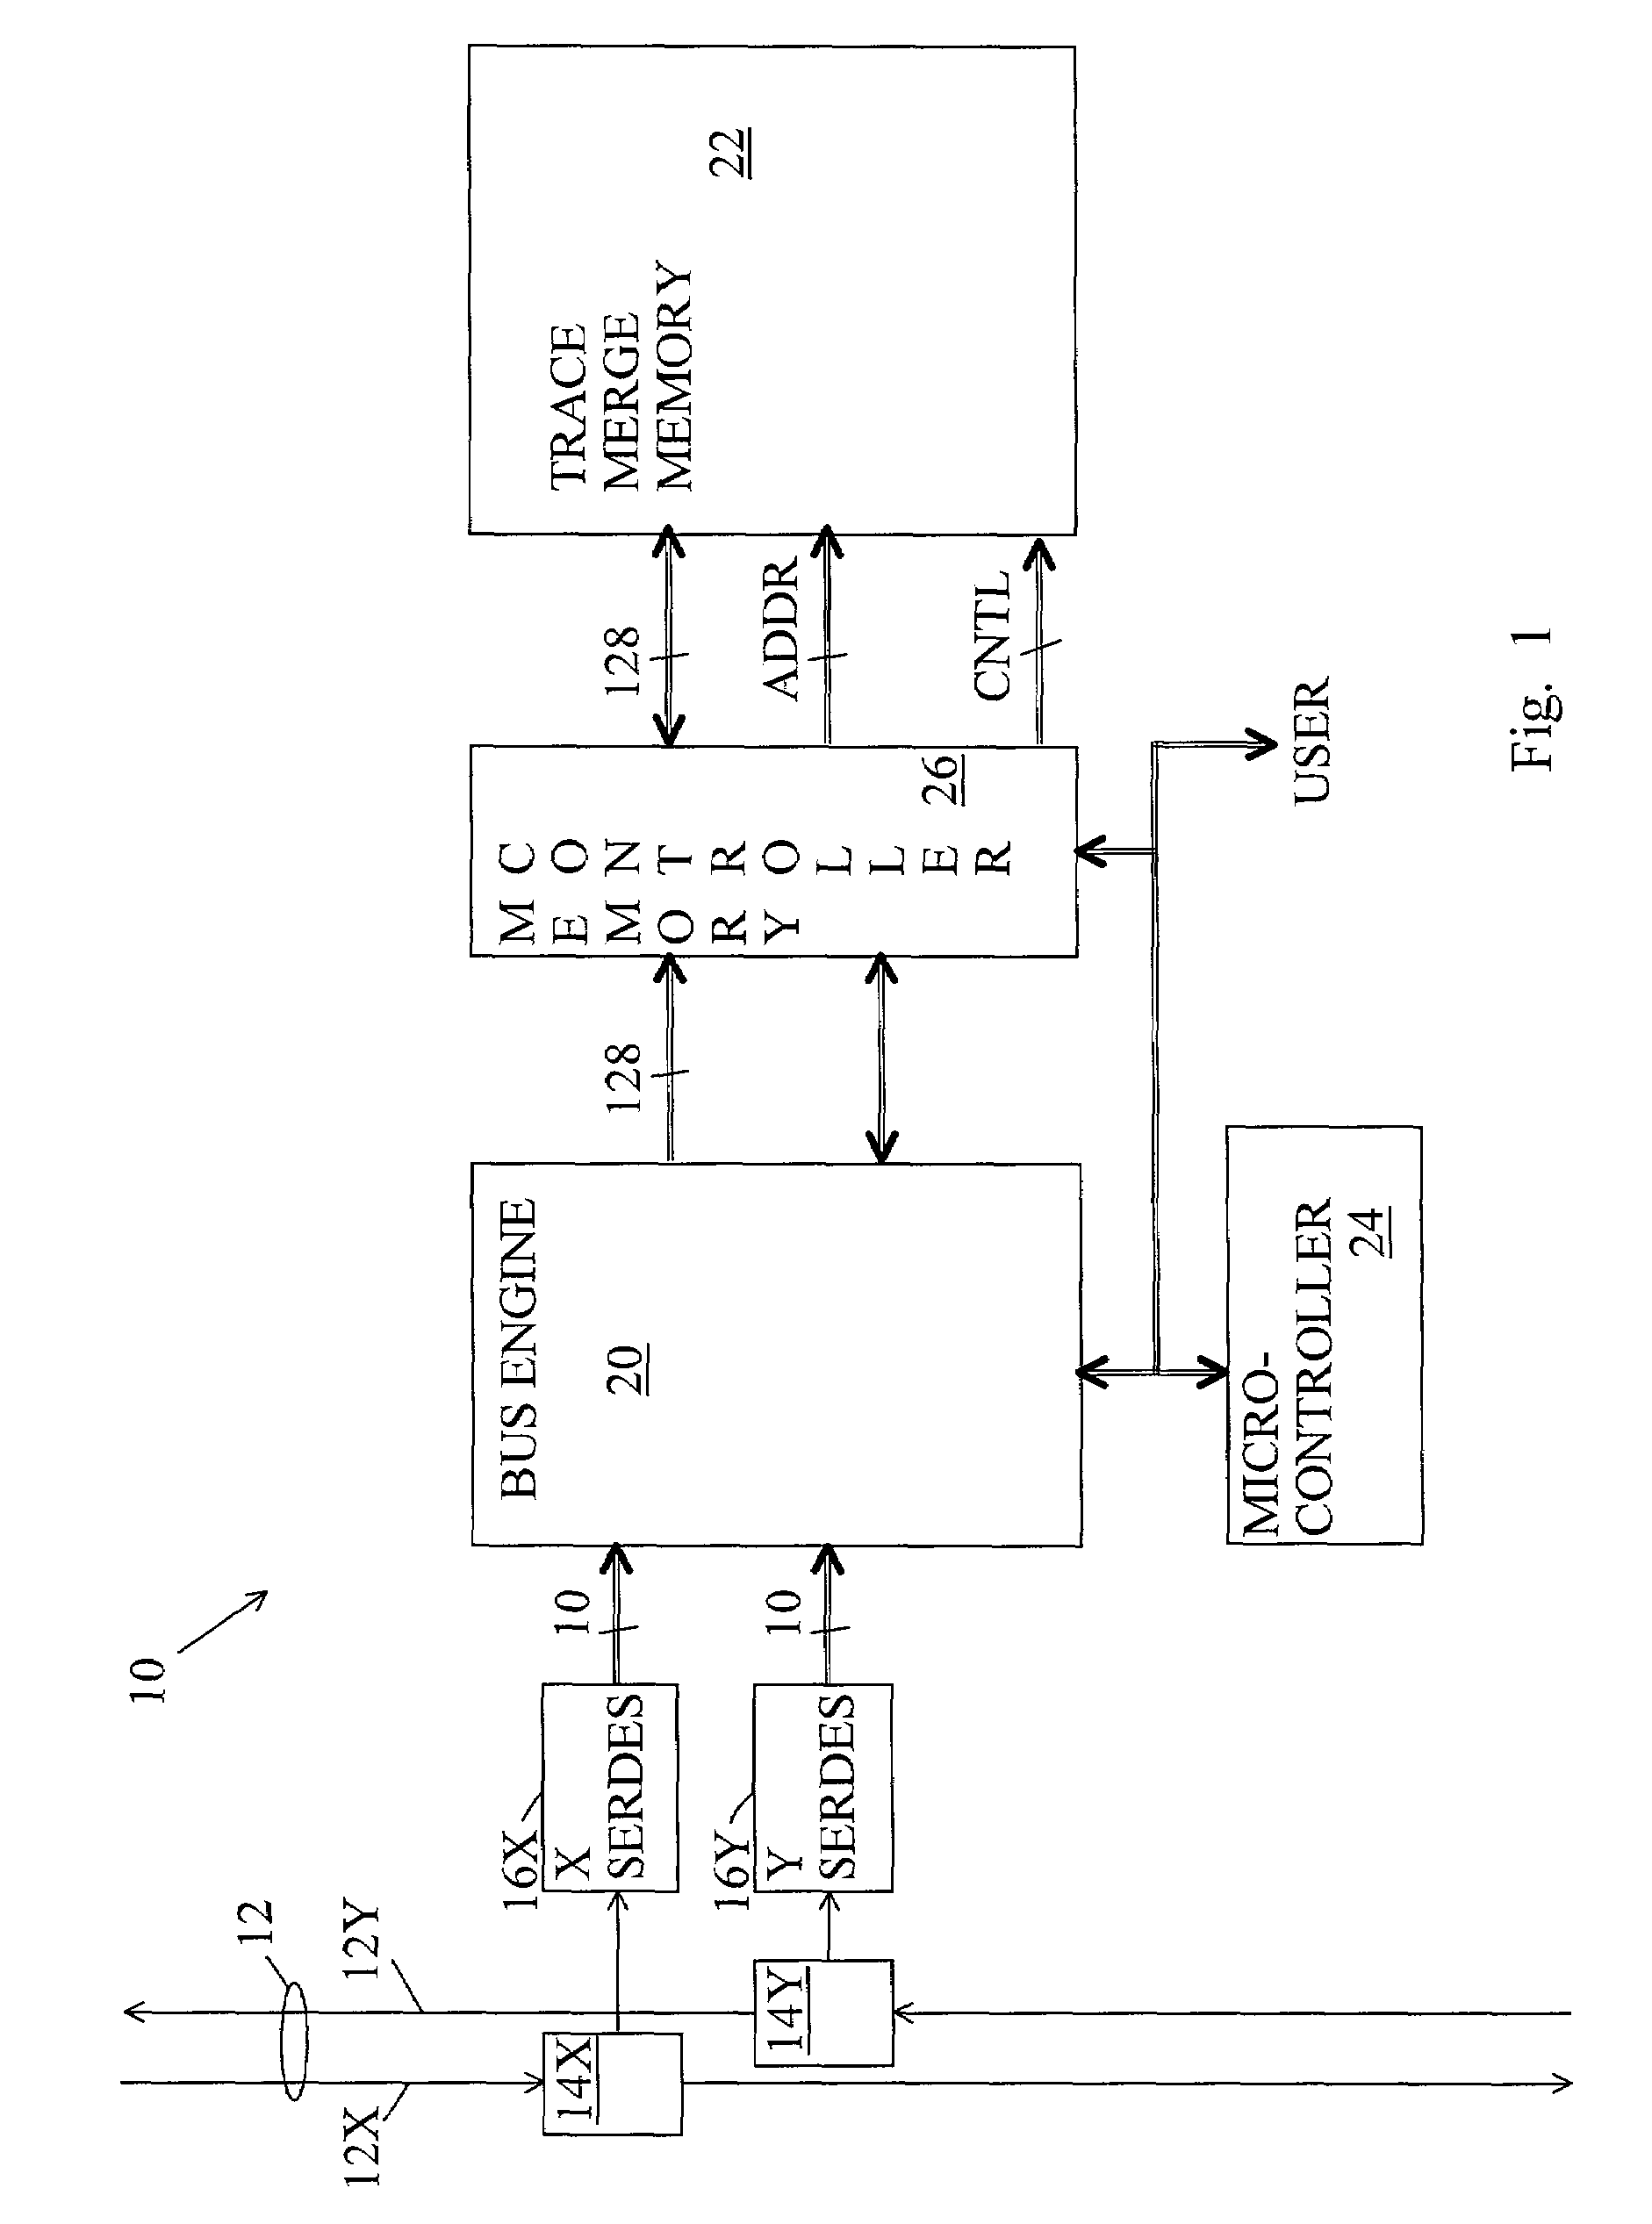 Protocol analyzer and time precise method for capturing multi-directional packet traffic